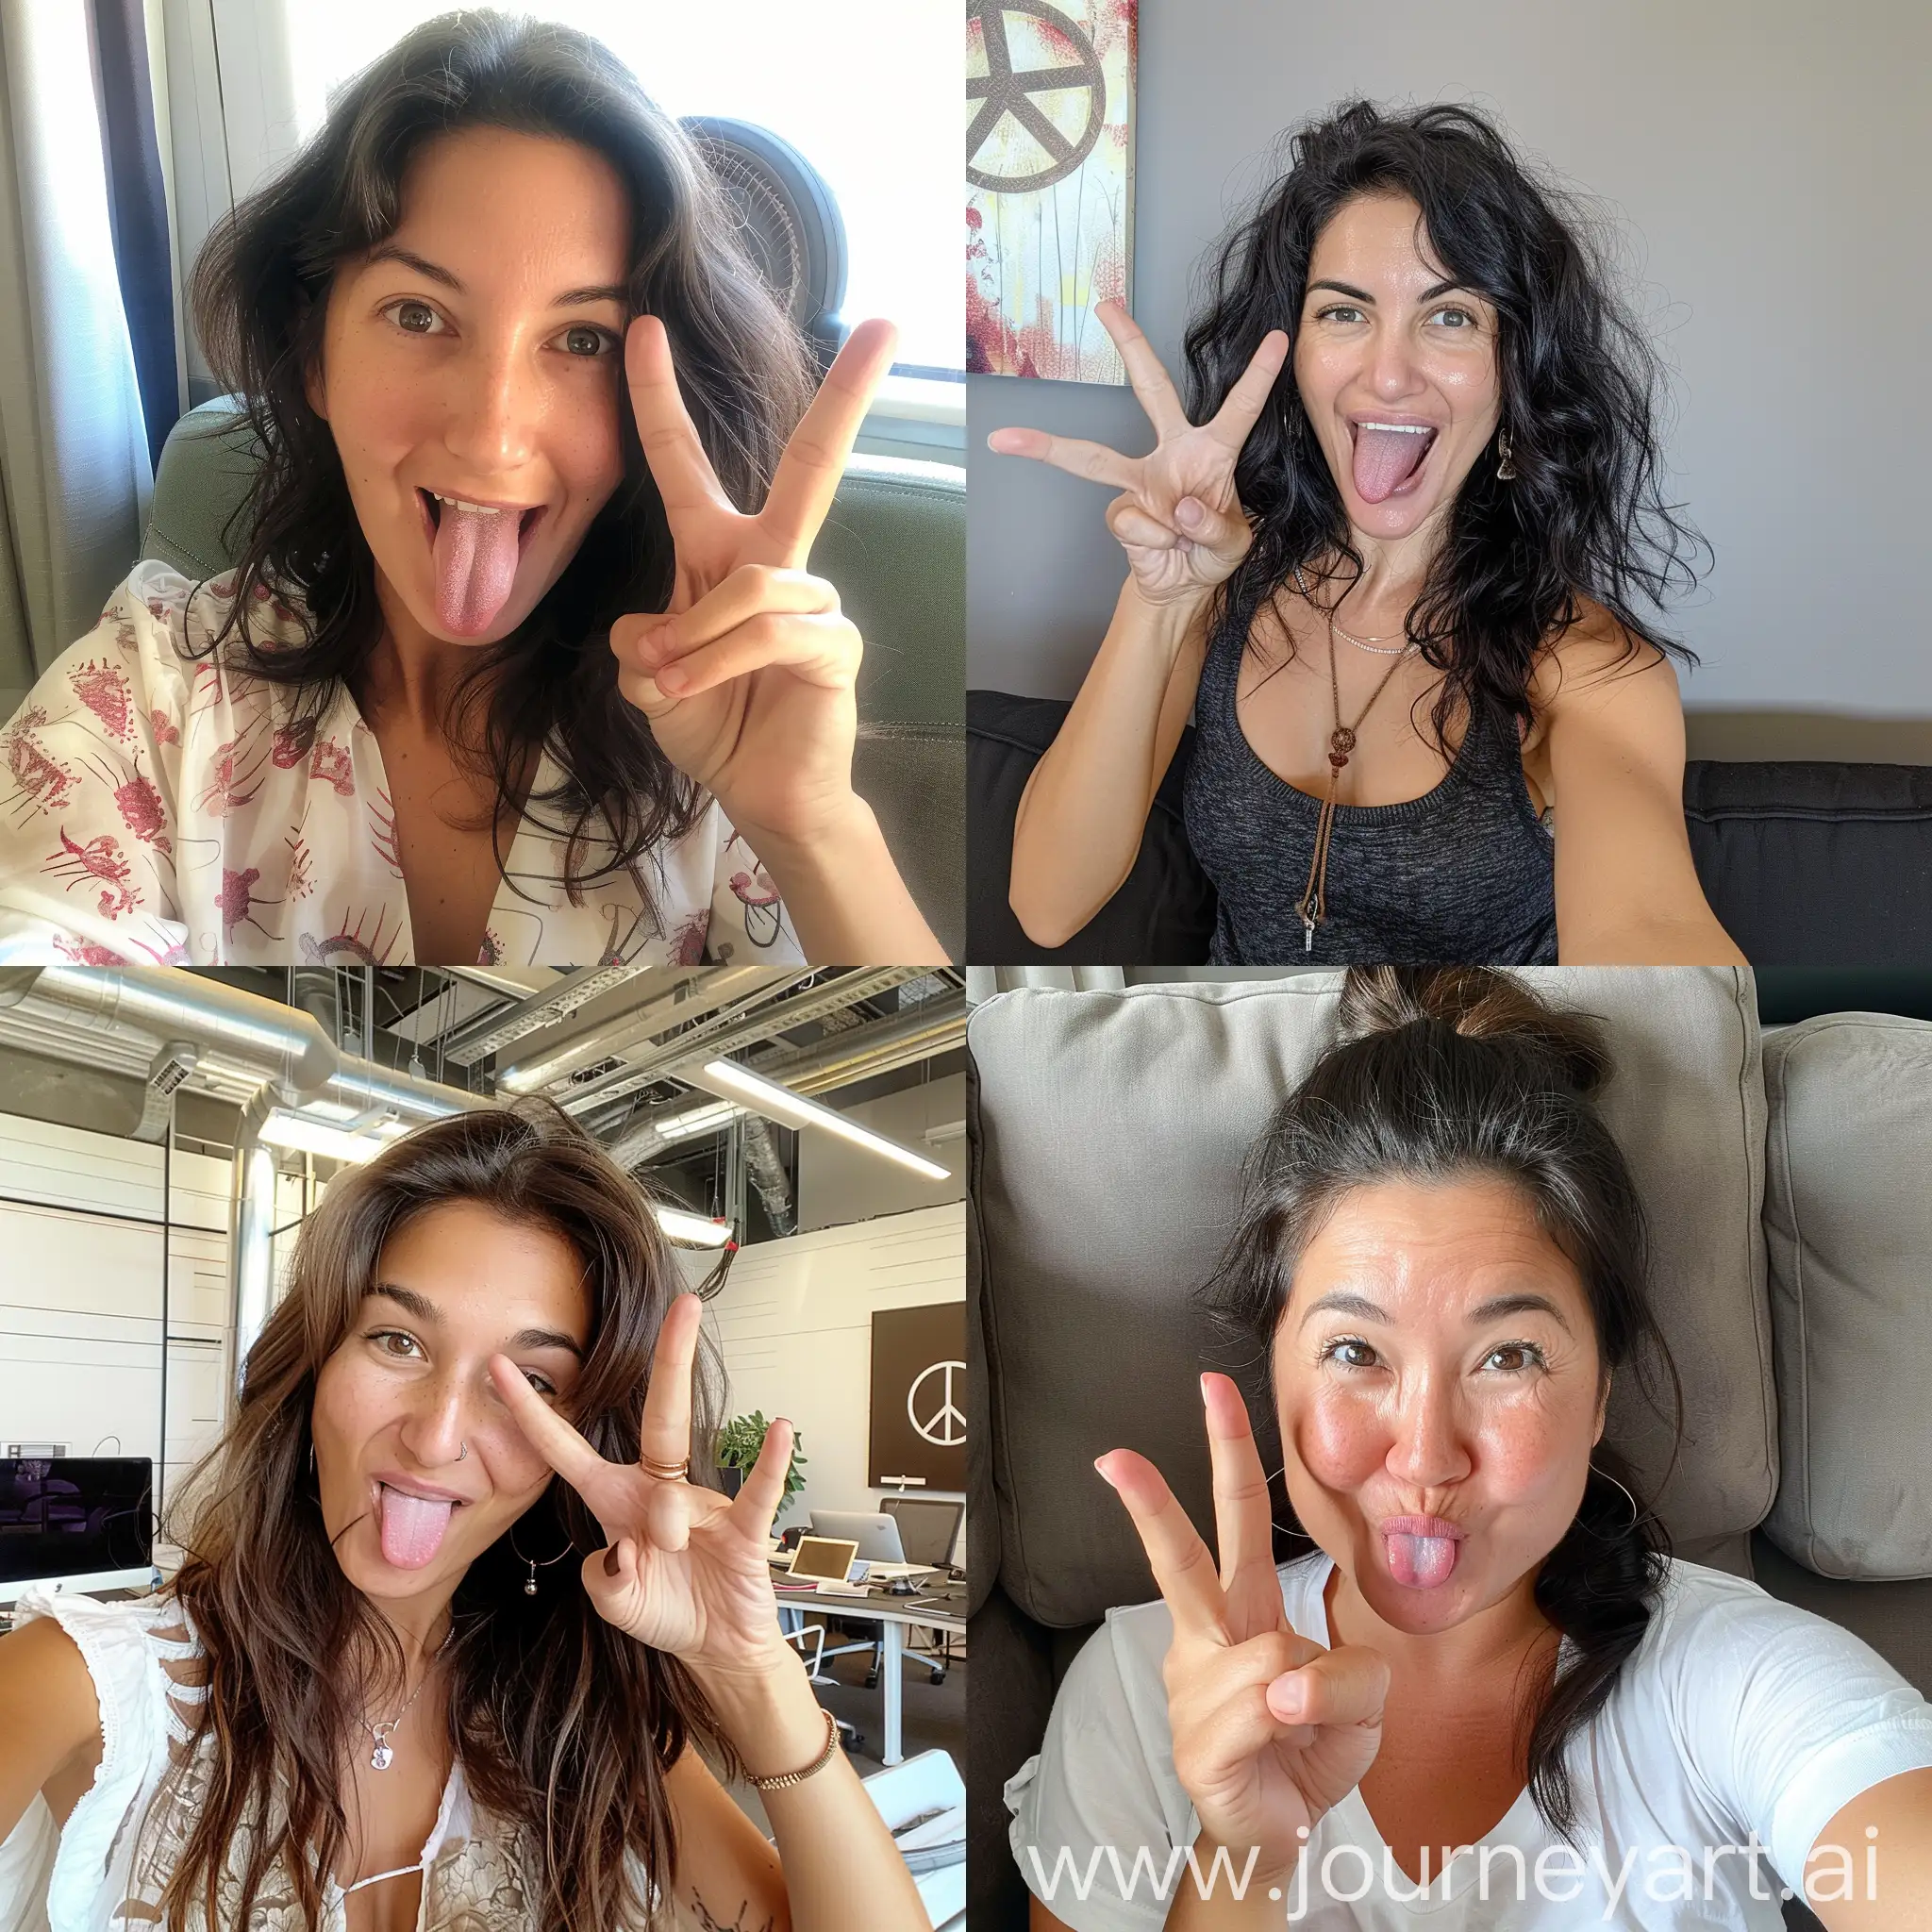 selfie of a woman making the peace sign, silly face, tongue out